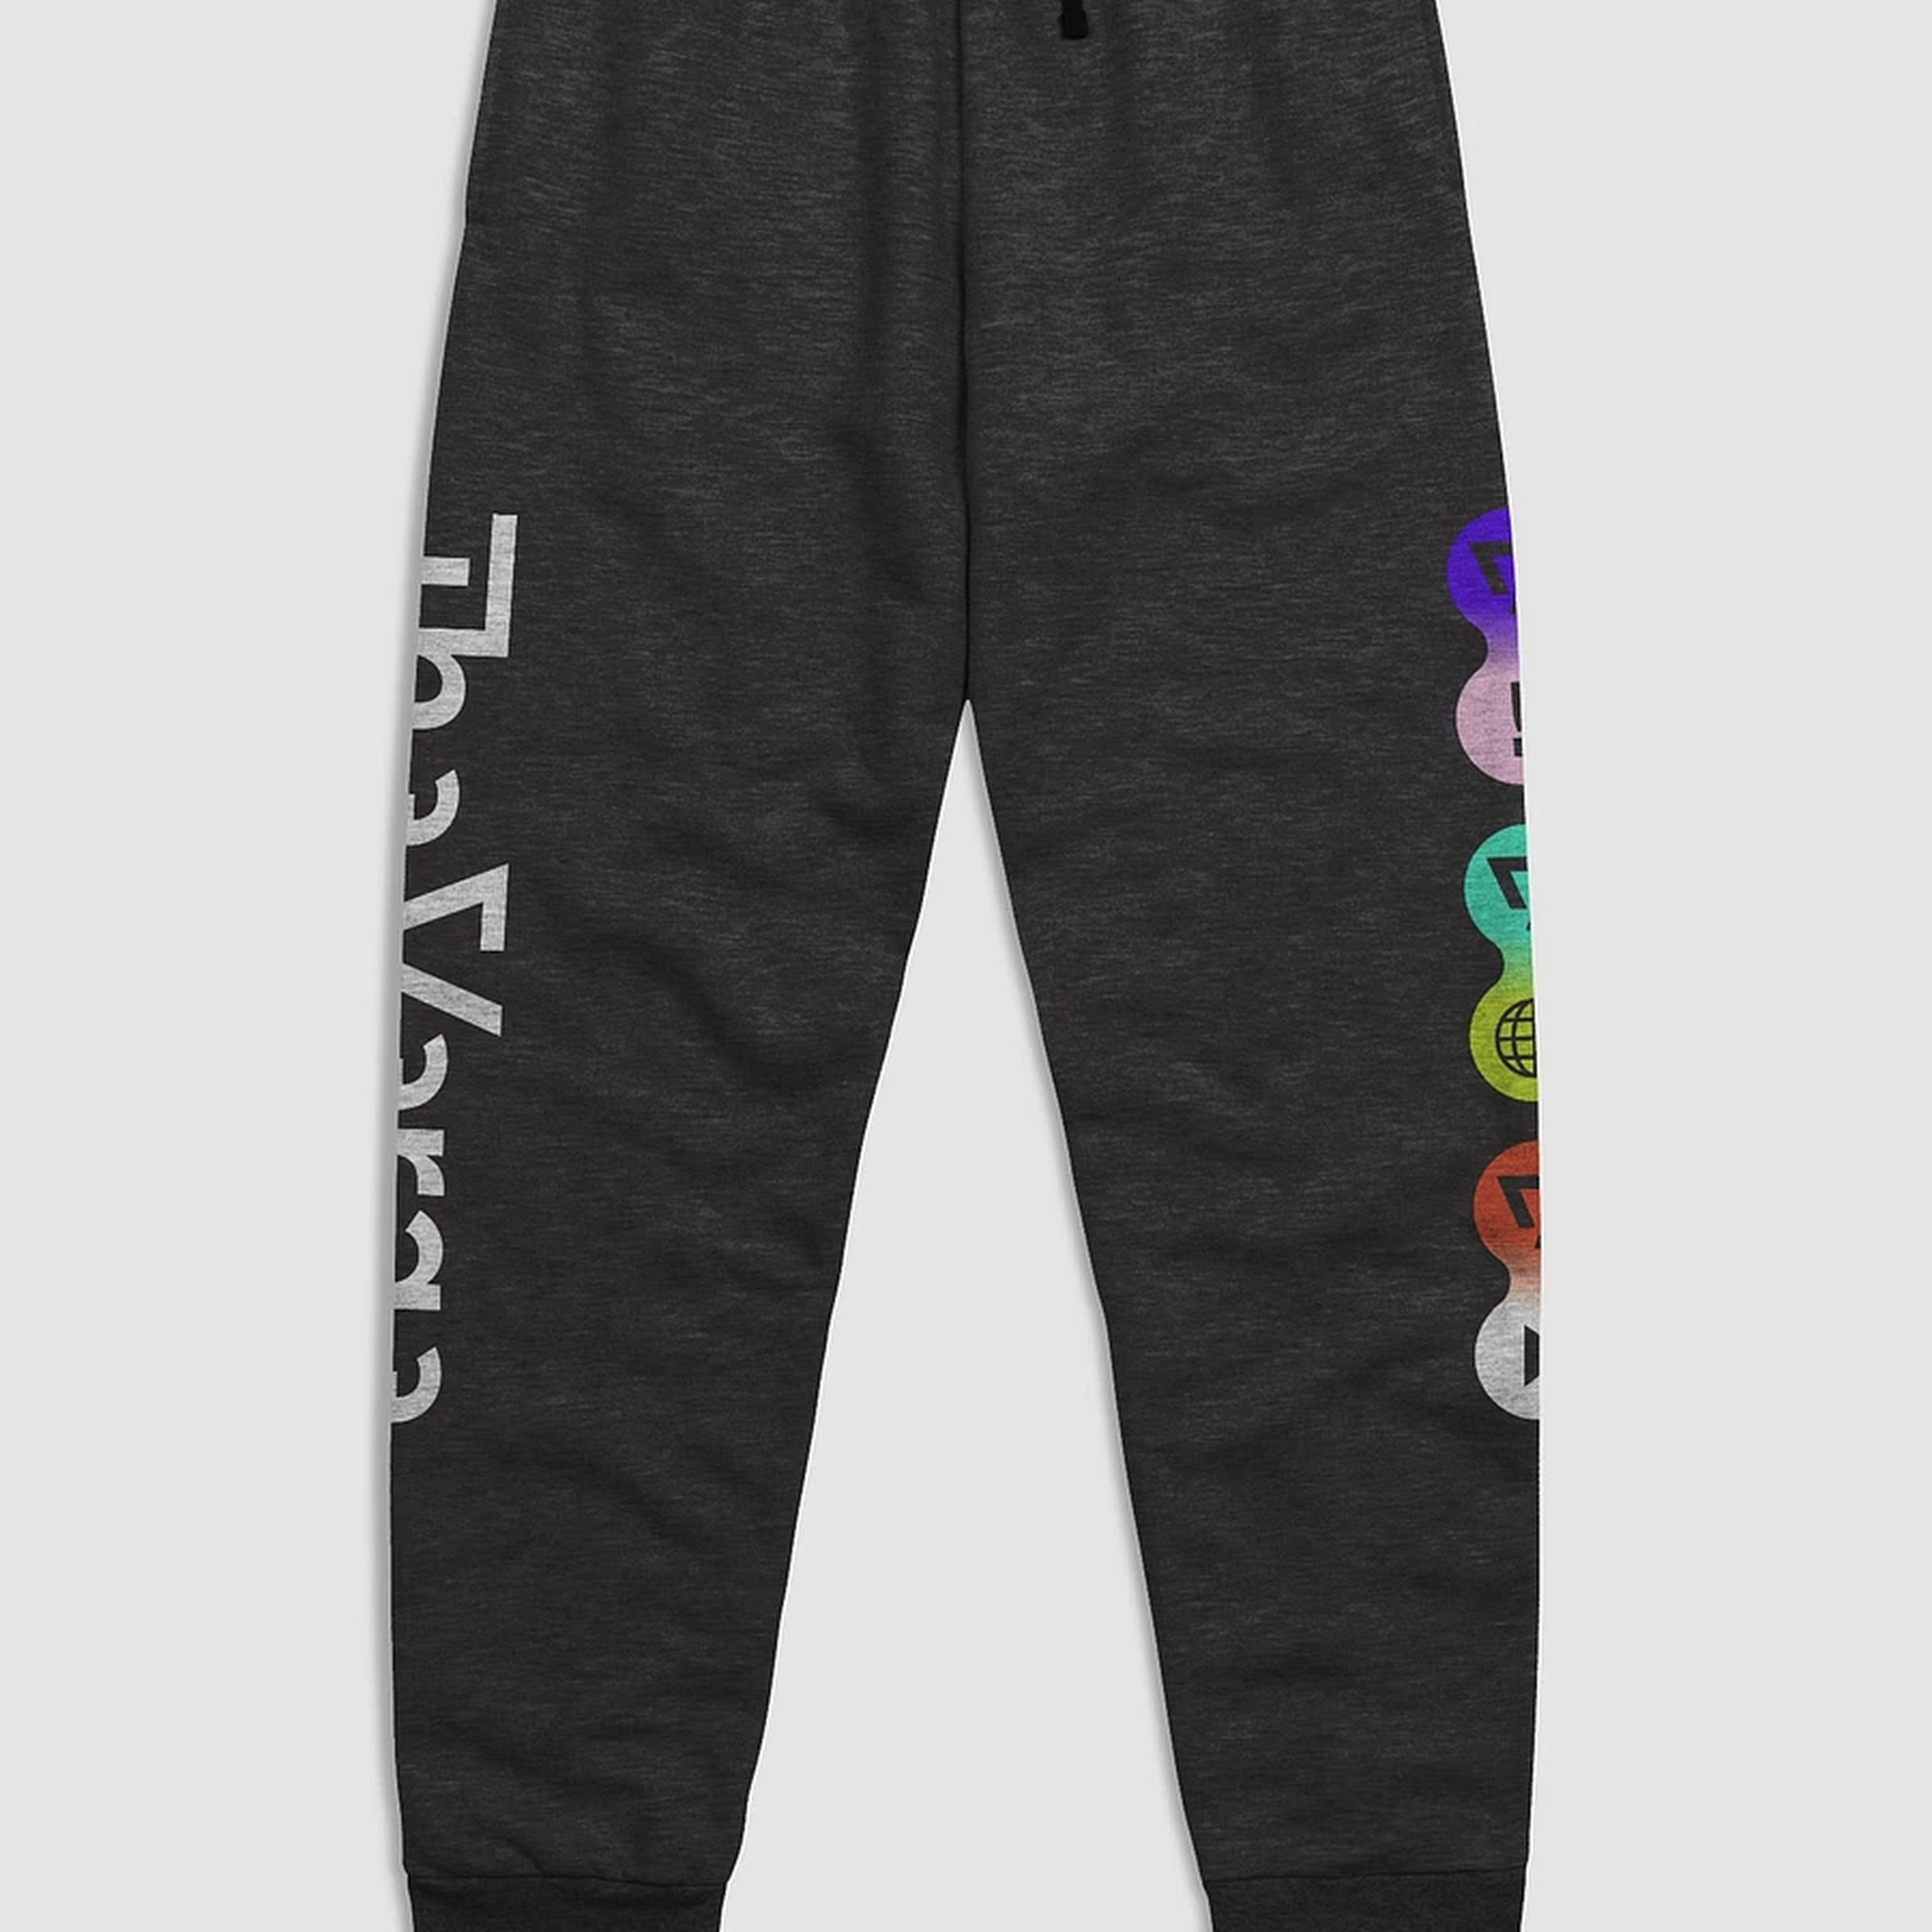 Black jogger pants with The Verge logo and icons